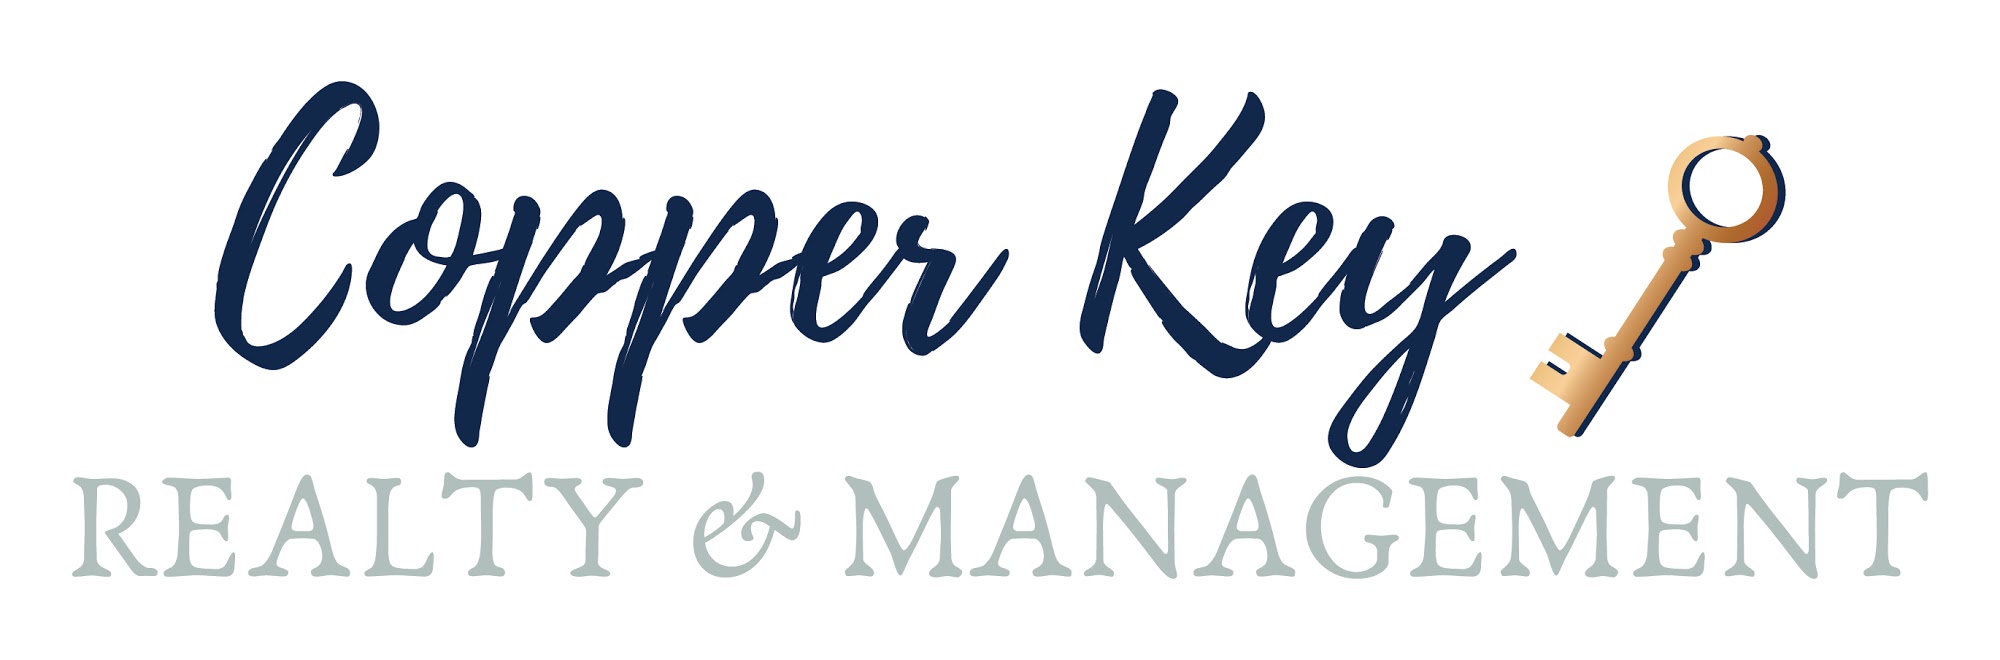 Copper Key Realty and Management